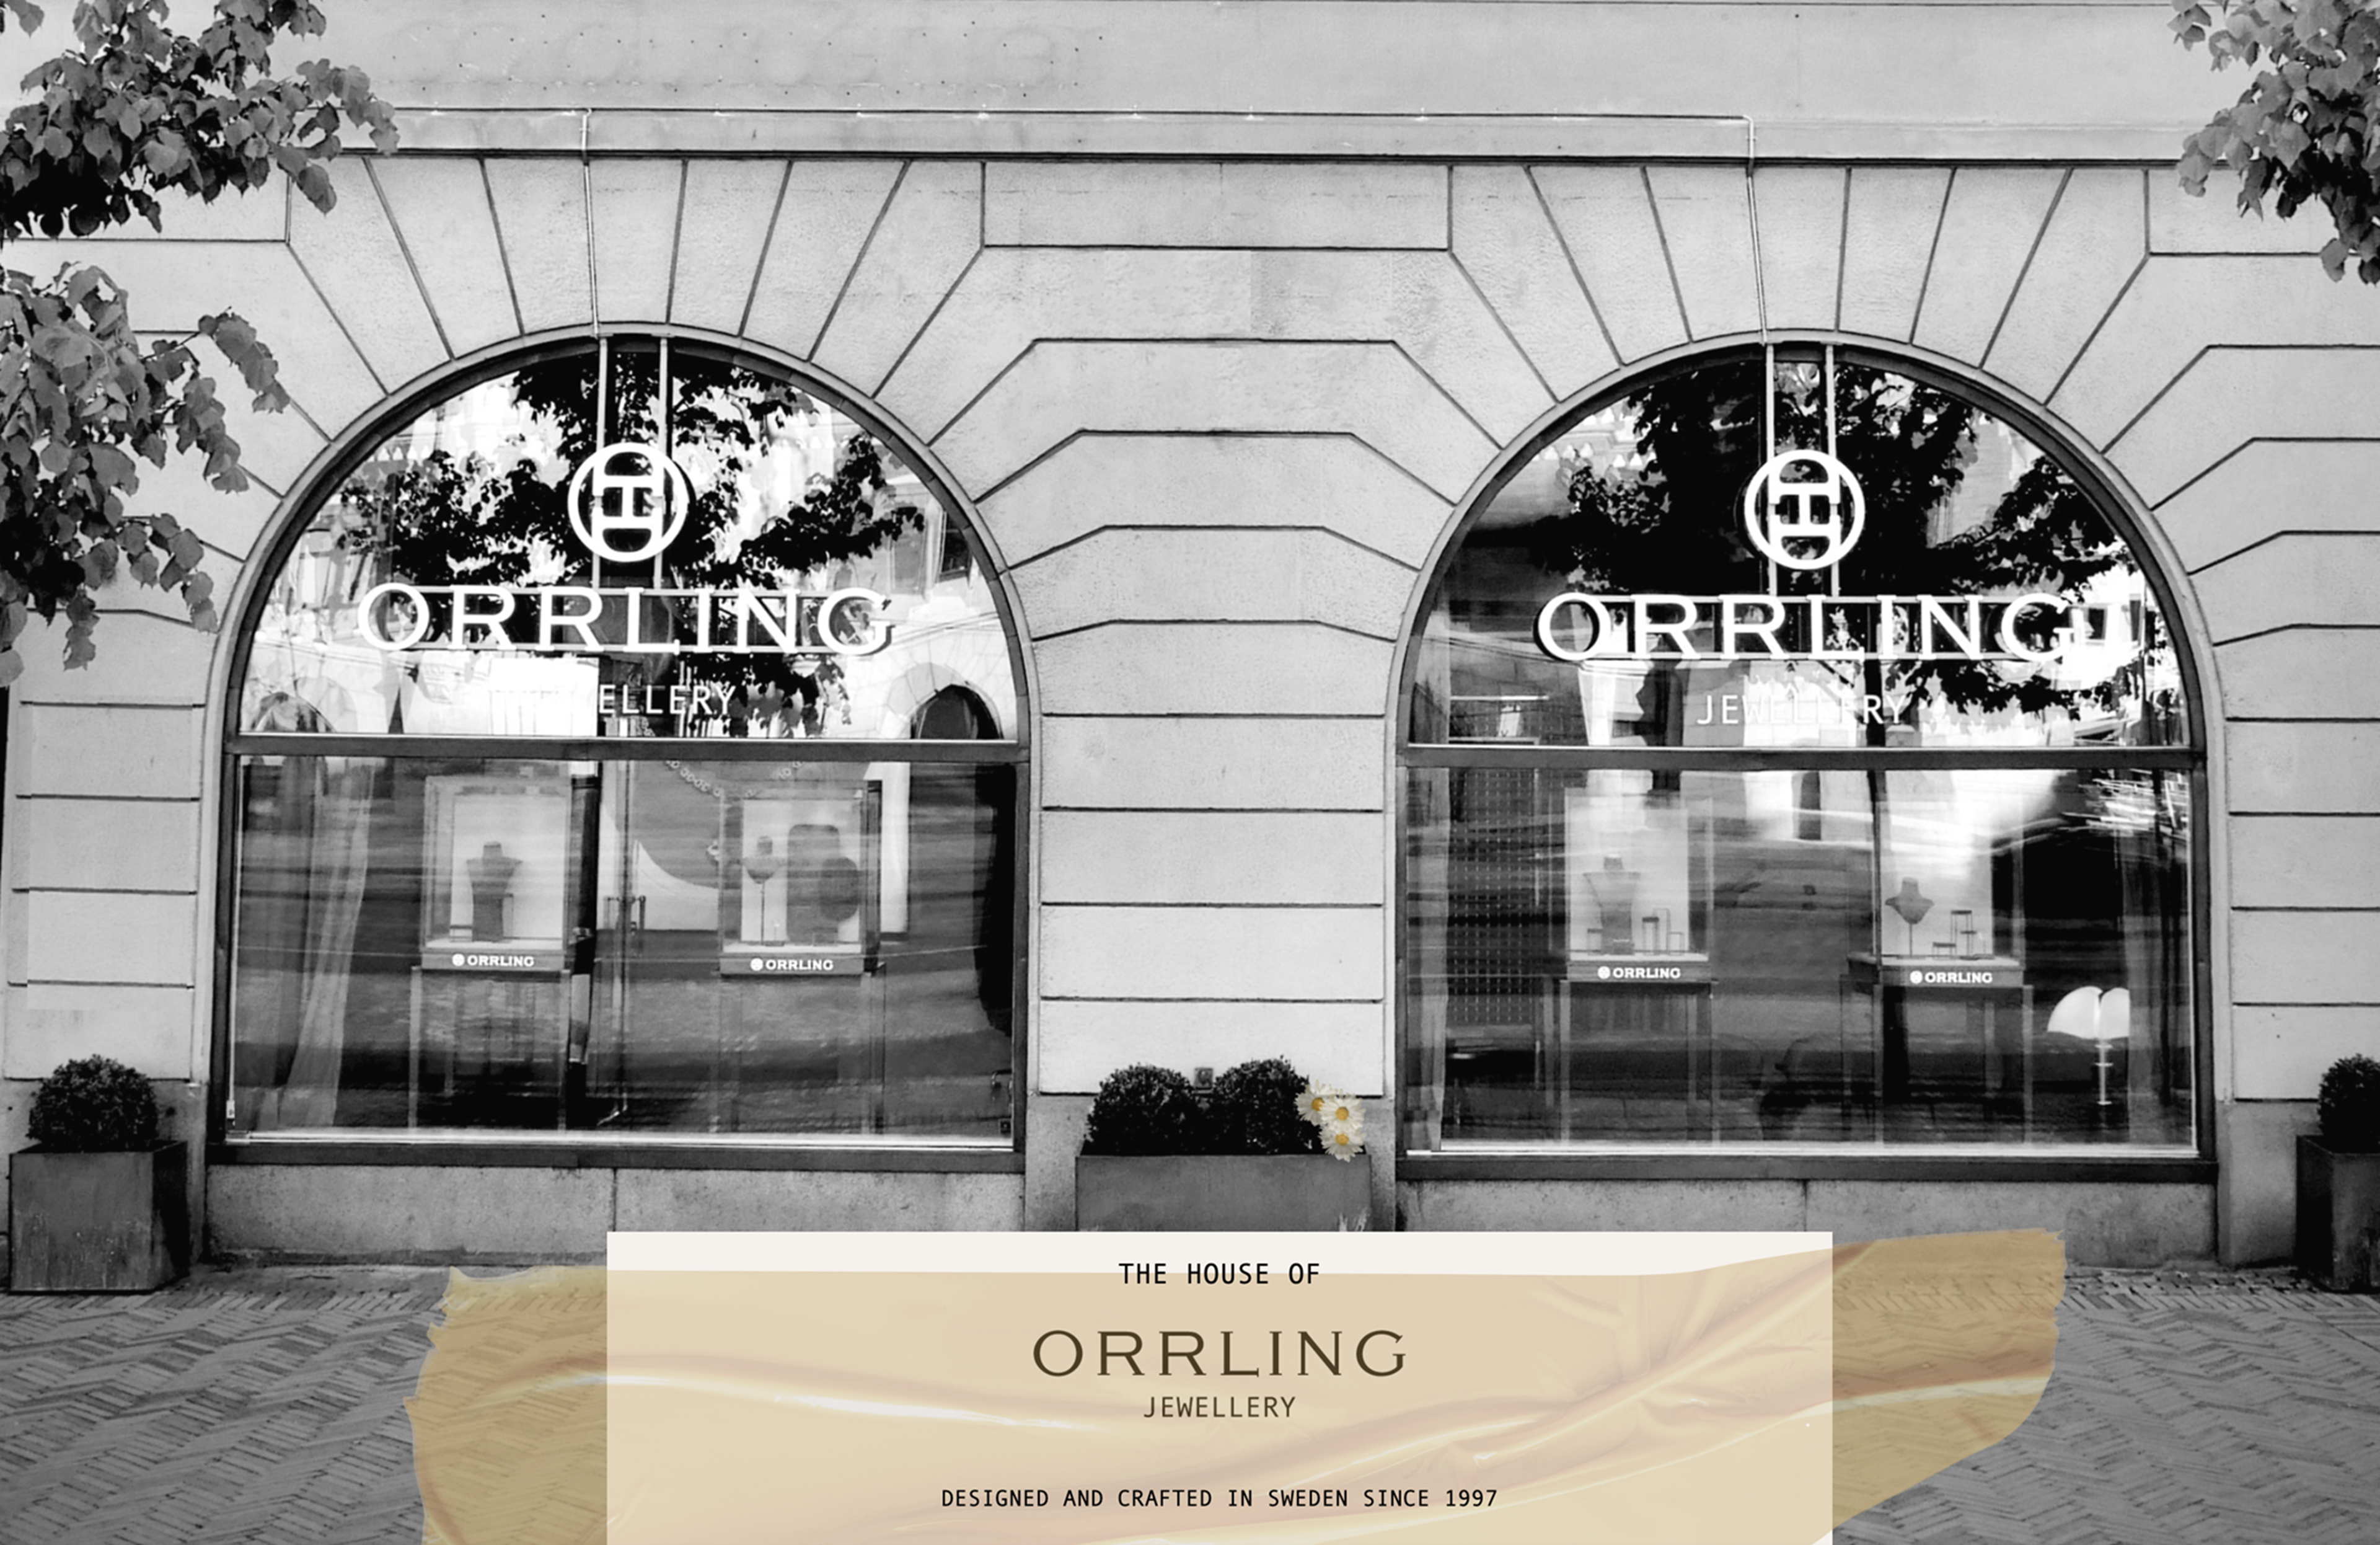 The house of Orrling Jewellery